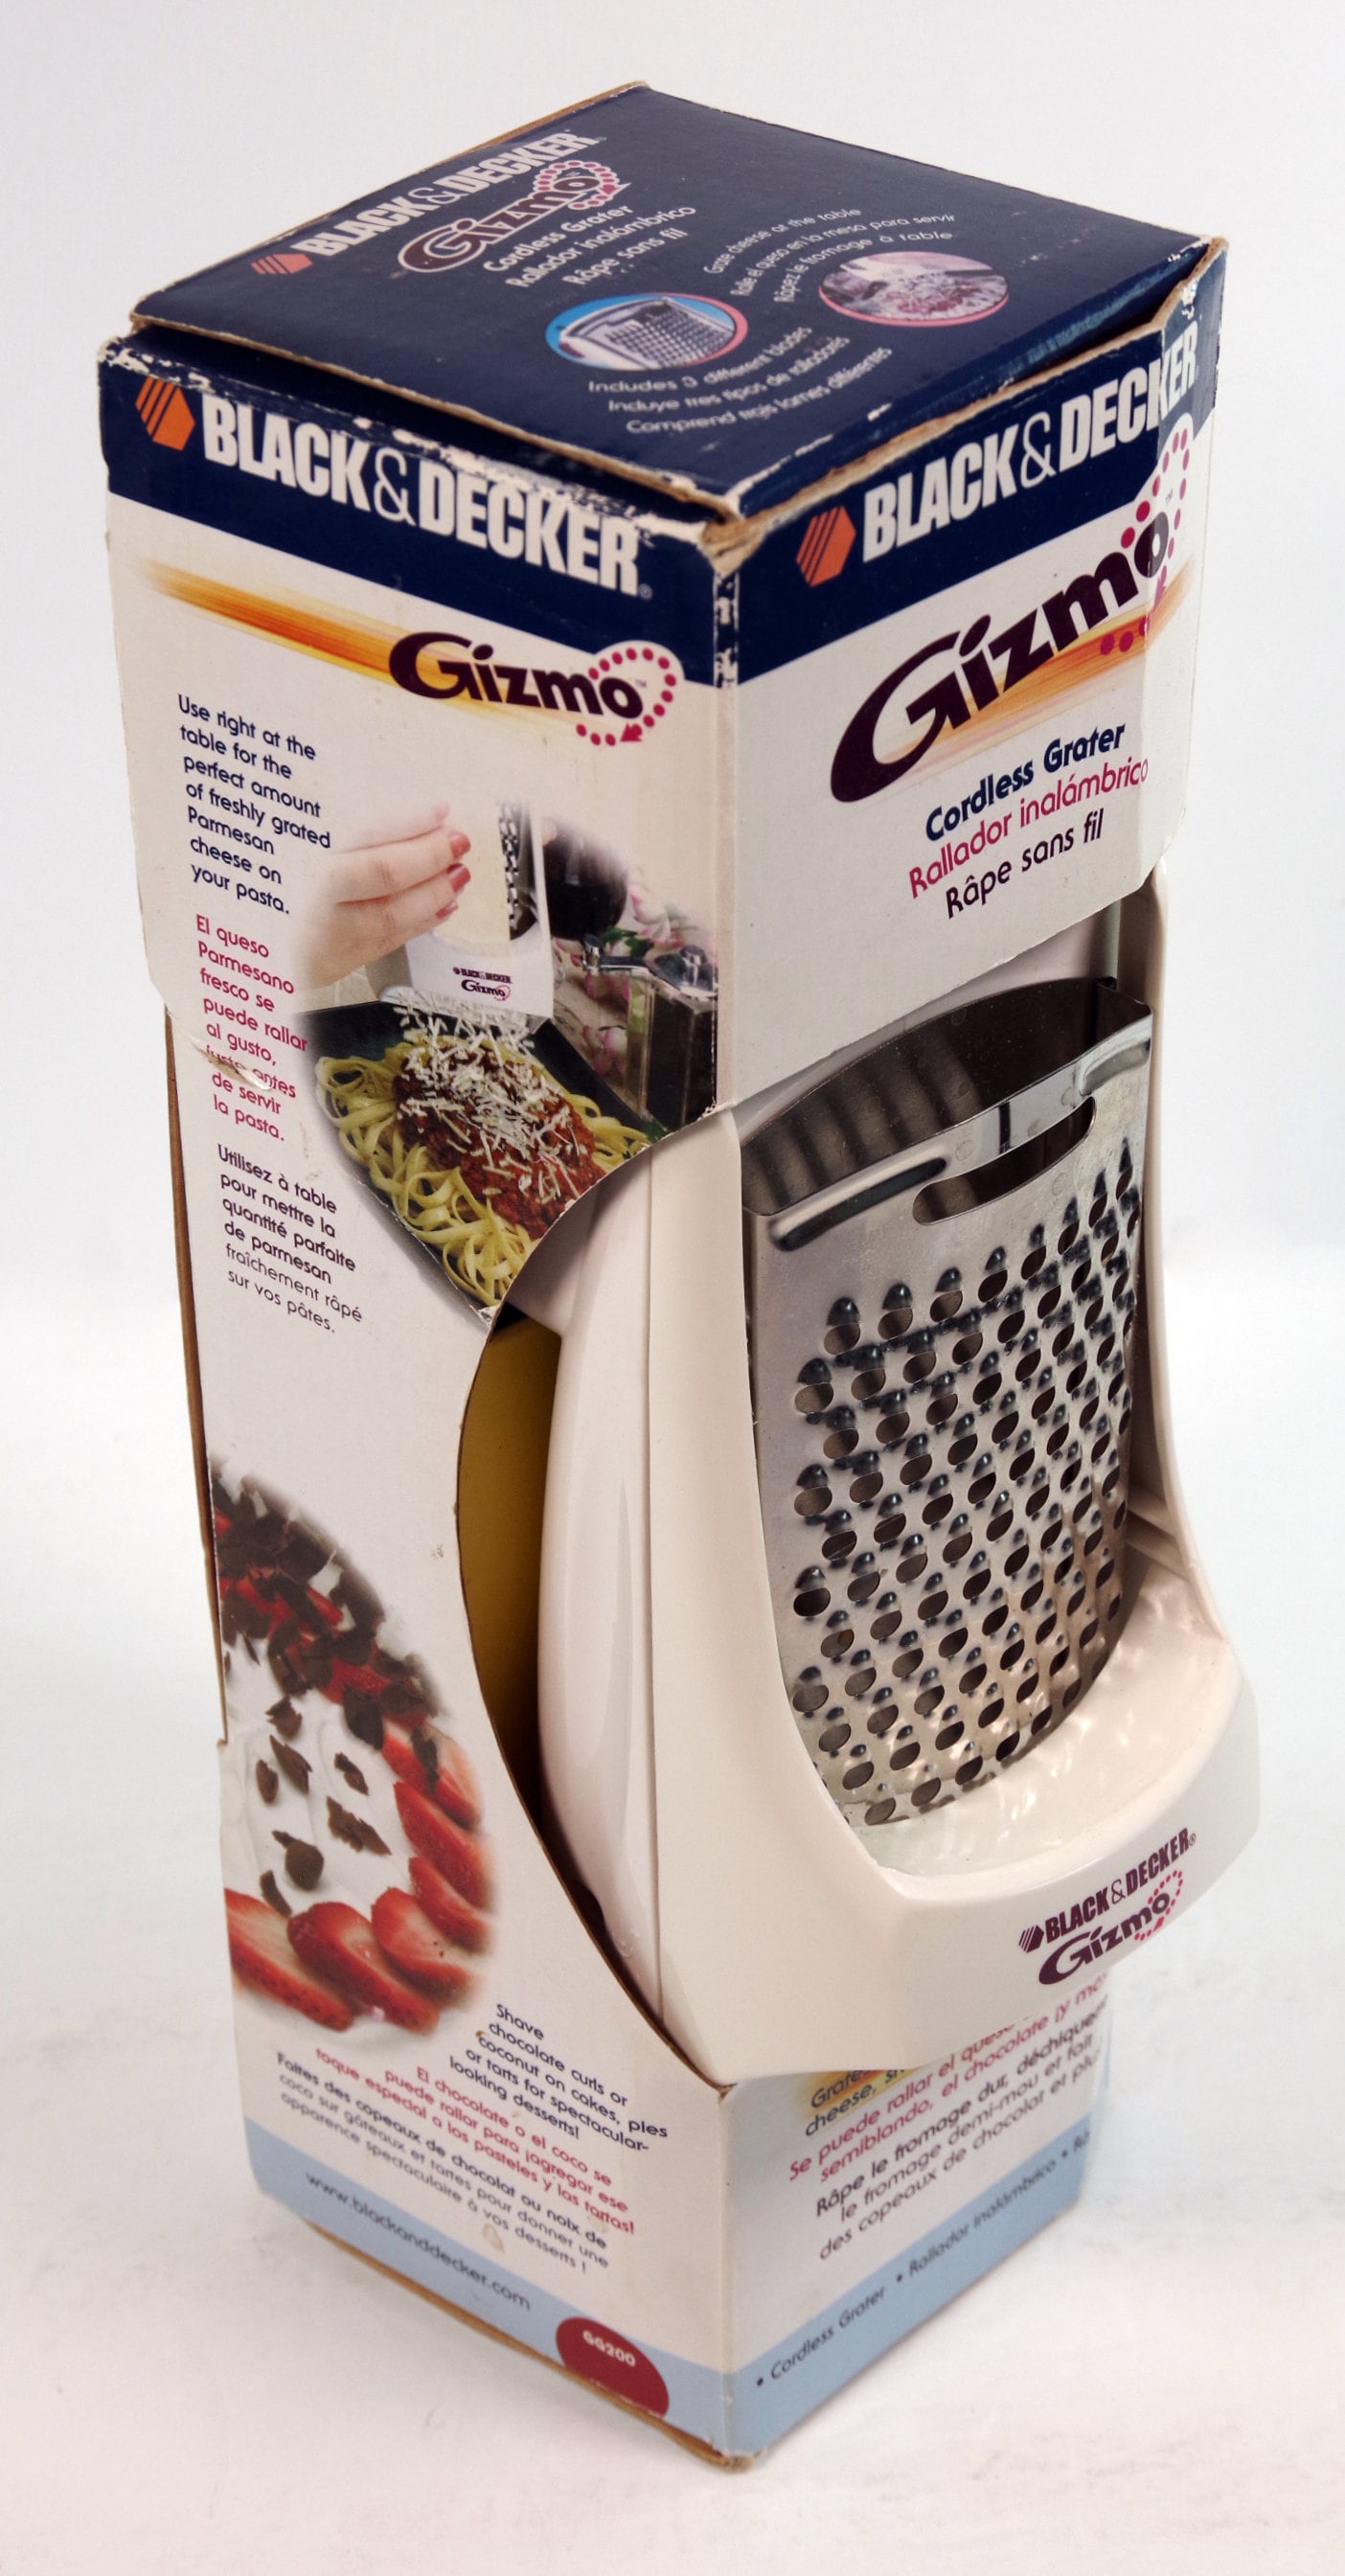 Black & Decker Gizmo Electric Cheese Chocolate Grater Cordless